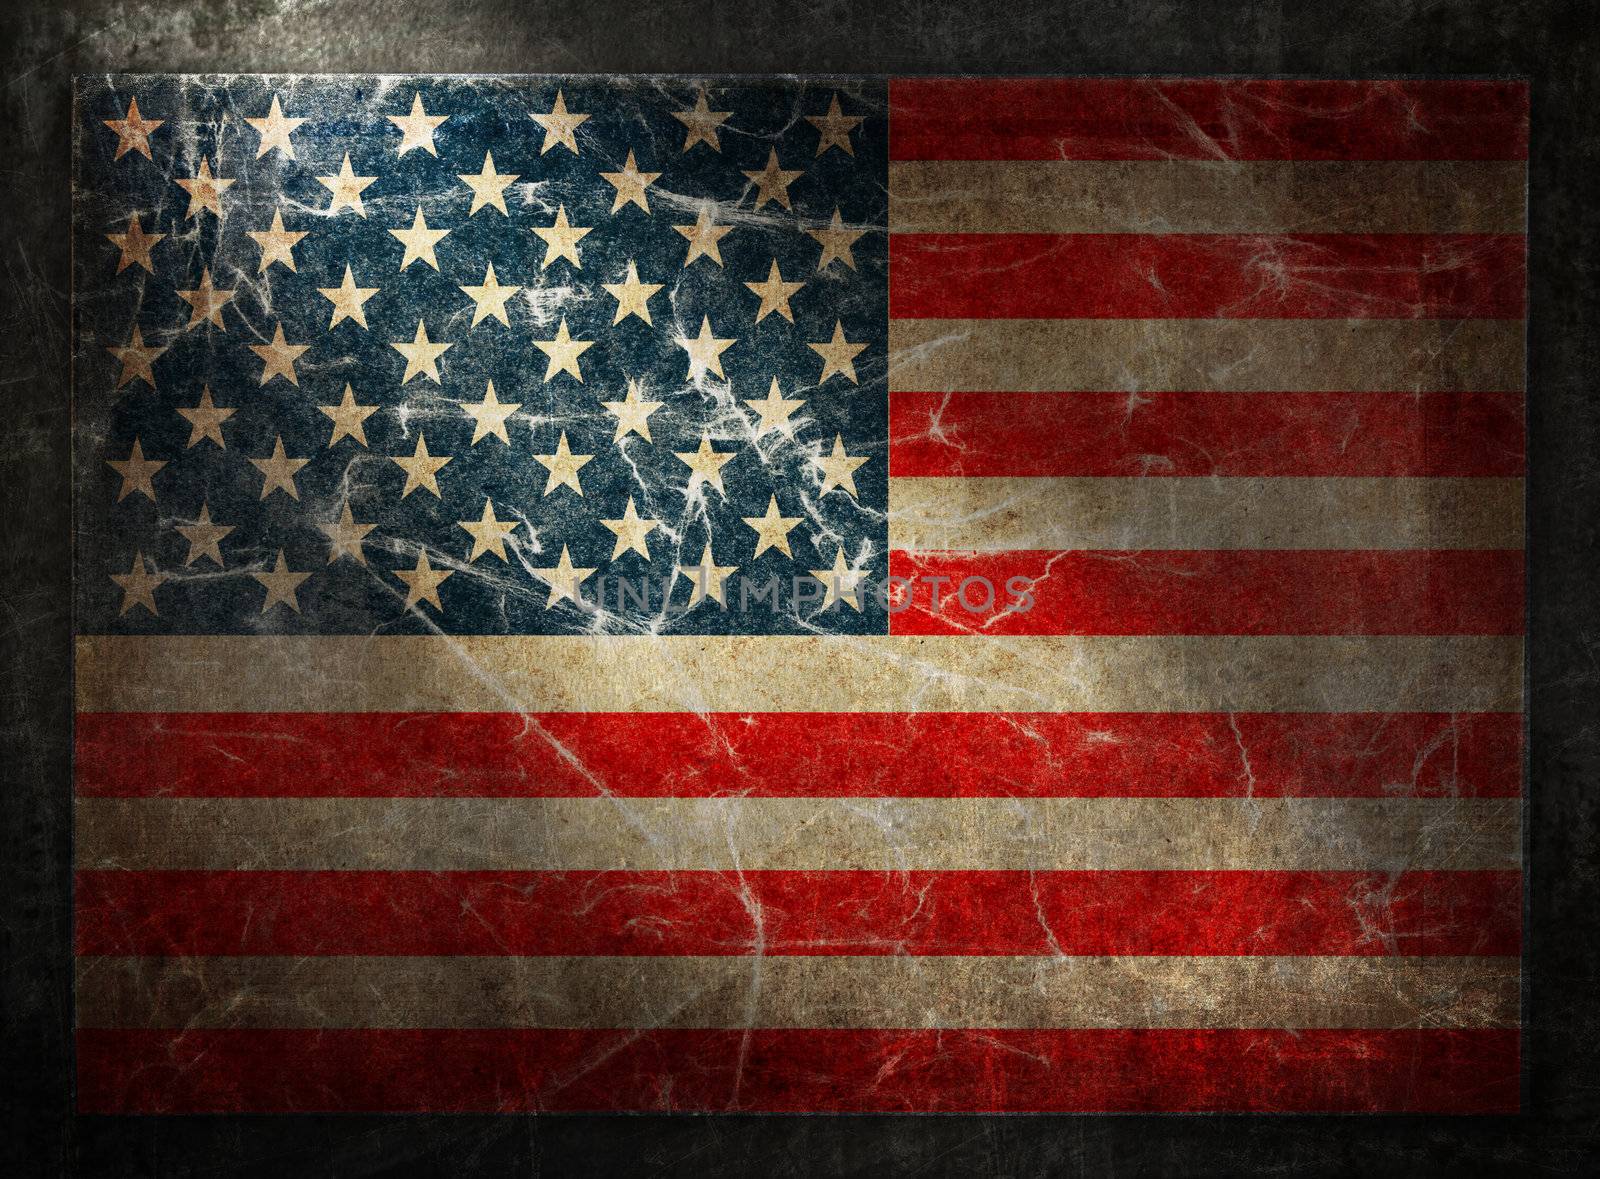 Grunge flag of USA. Horizontal composition by buchachon